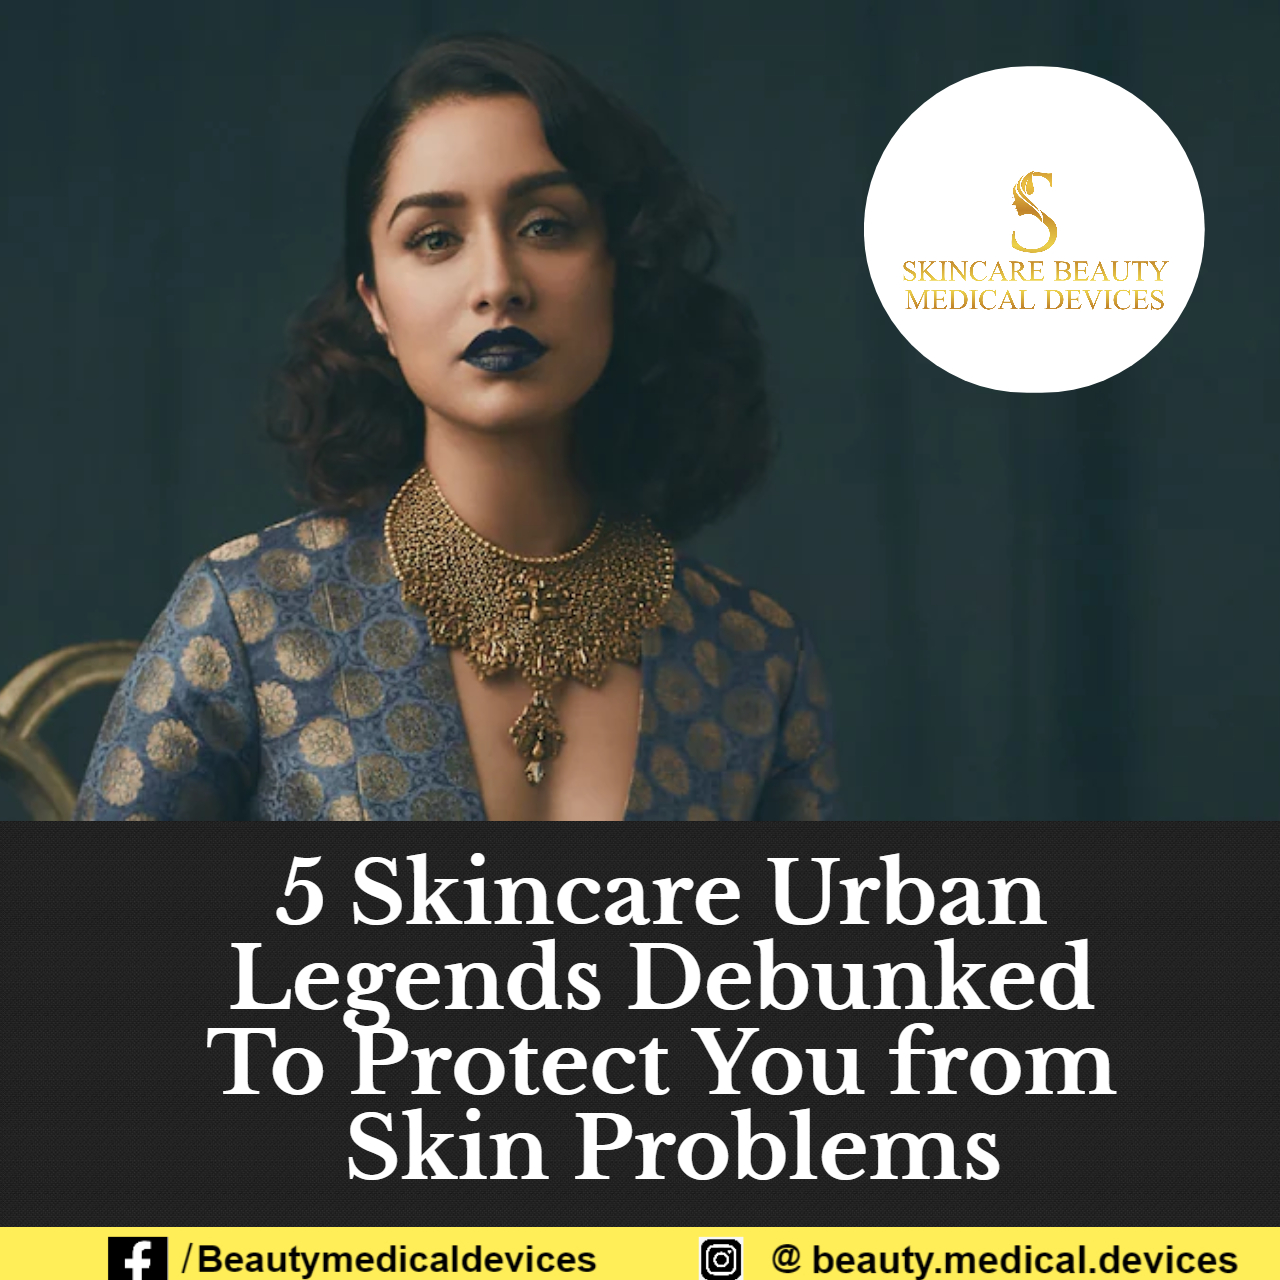 5 Skincare Urban Legends Debunked To Protect You from Skin Problems